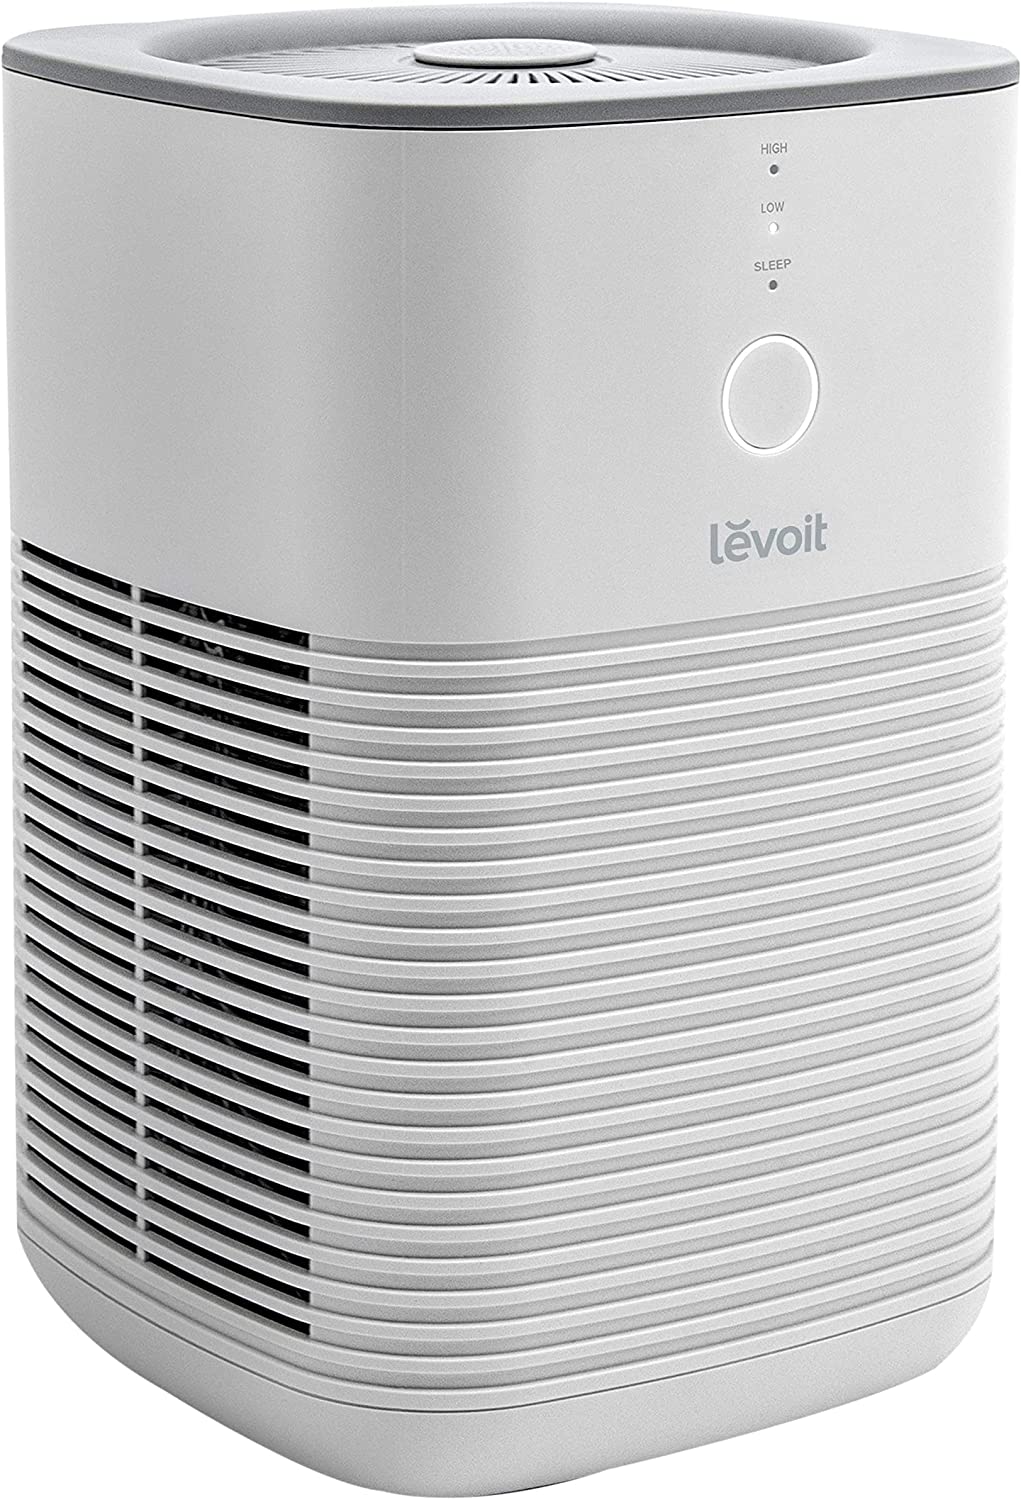 LEVOIT Air Purifier for Home Bedroom, HEPA Fresheners [...]